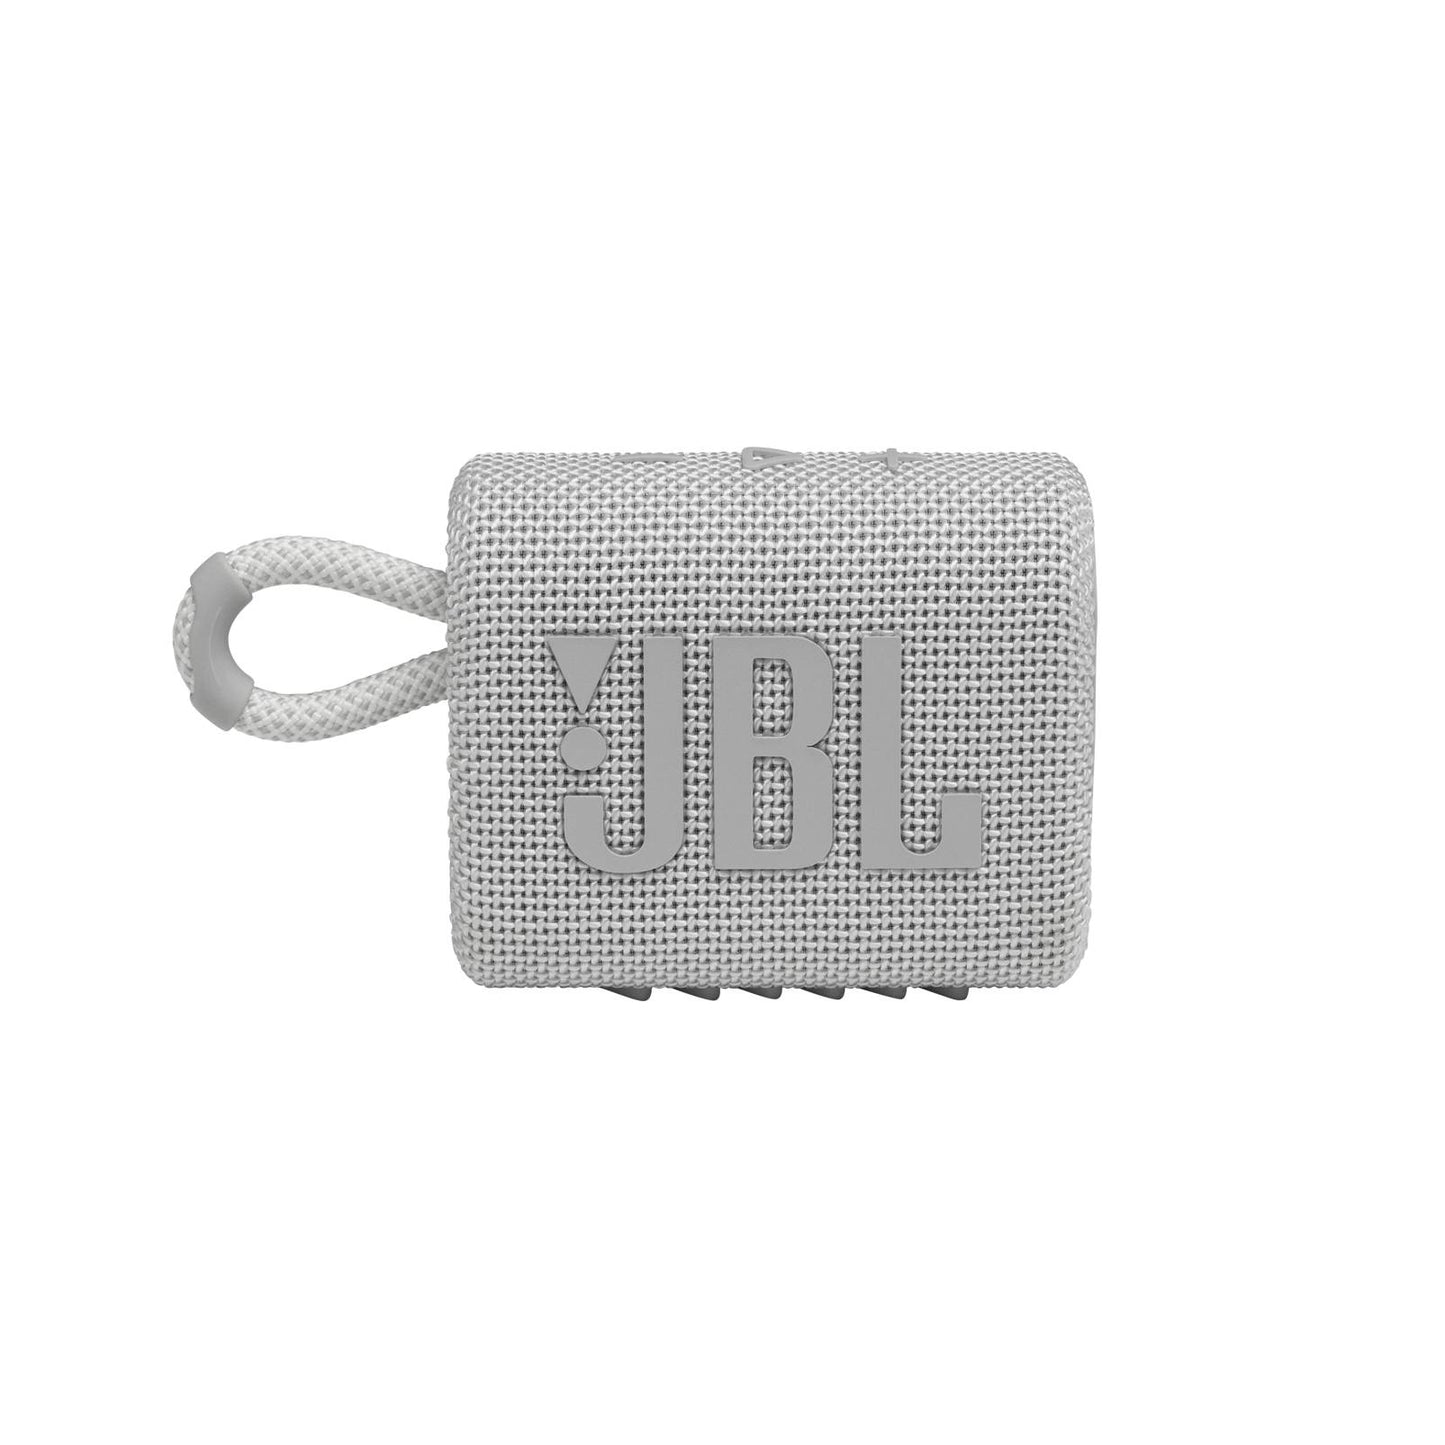 JBL GO 3 Portable Bluetooth Speaker, Wireless Speaker Box with Compact Design, IPX67 Water and Dust Resistant, up to 5 h of Battery Life, USB, White